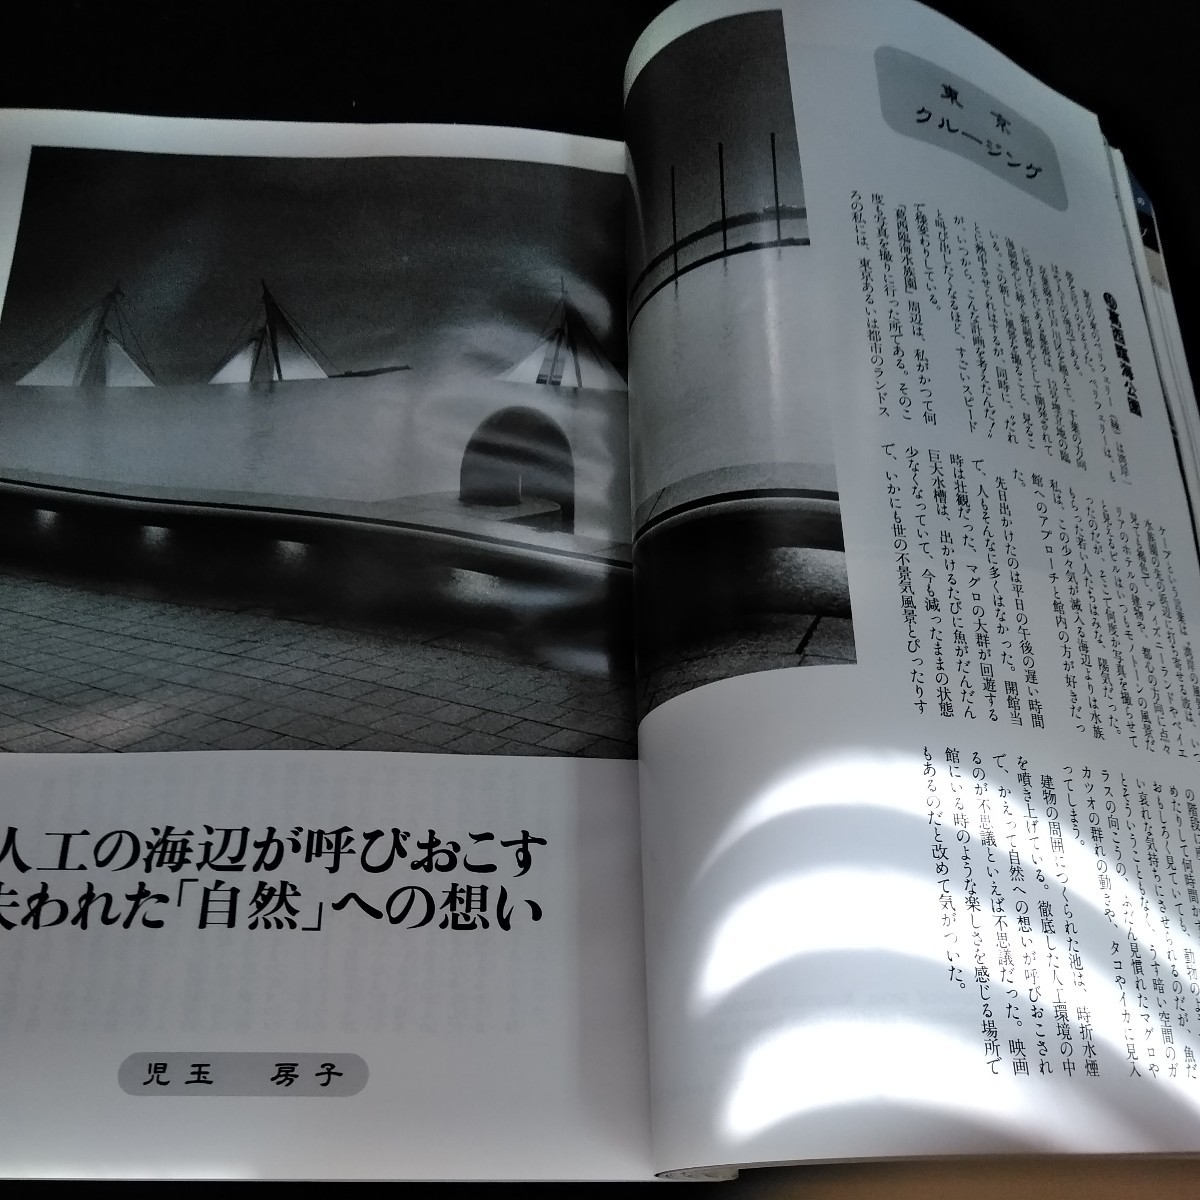 f-535 Asahi camera 1994 year 7 month number special collection NUDE[. body. change .] morning day newspaper company *6